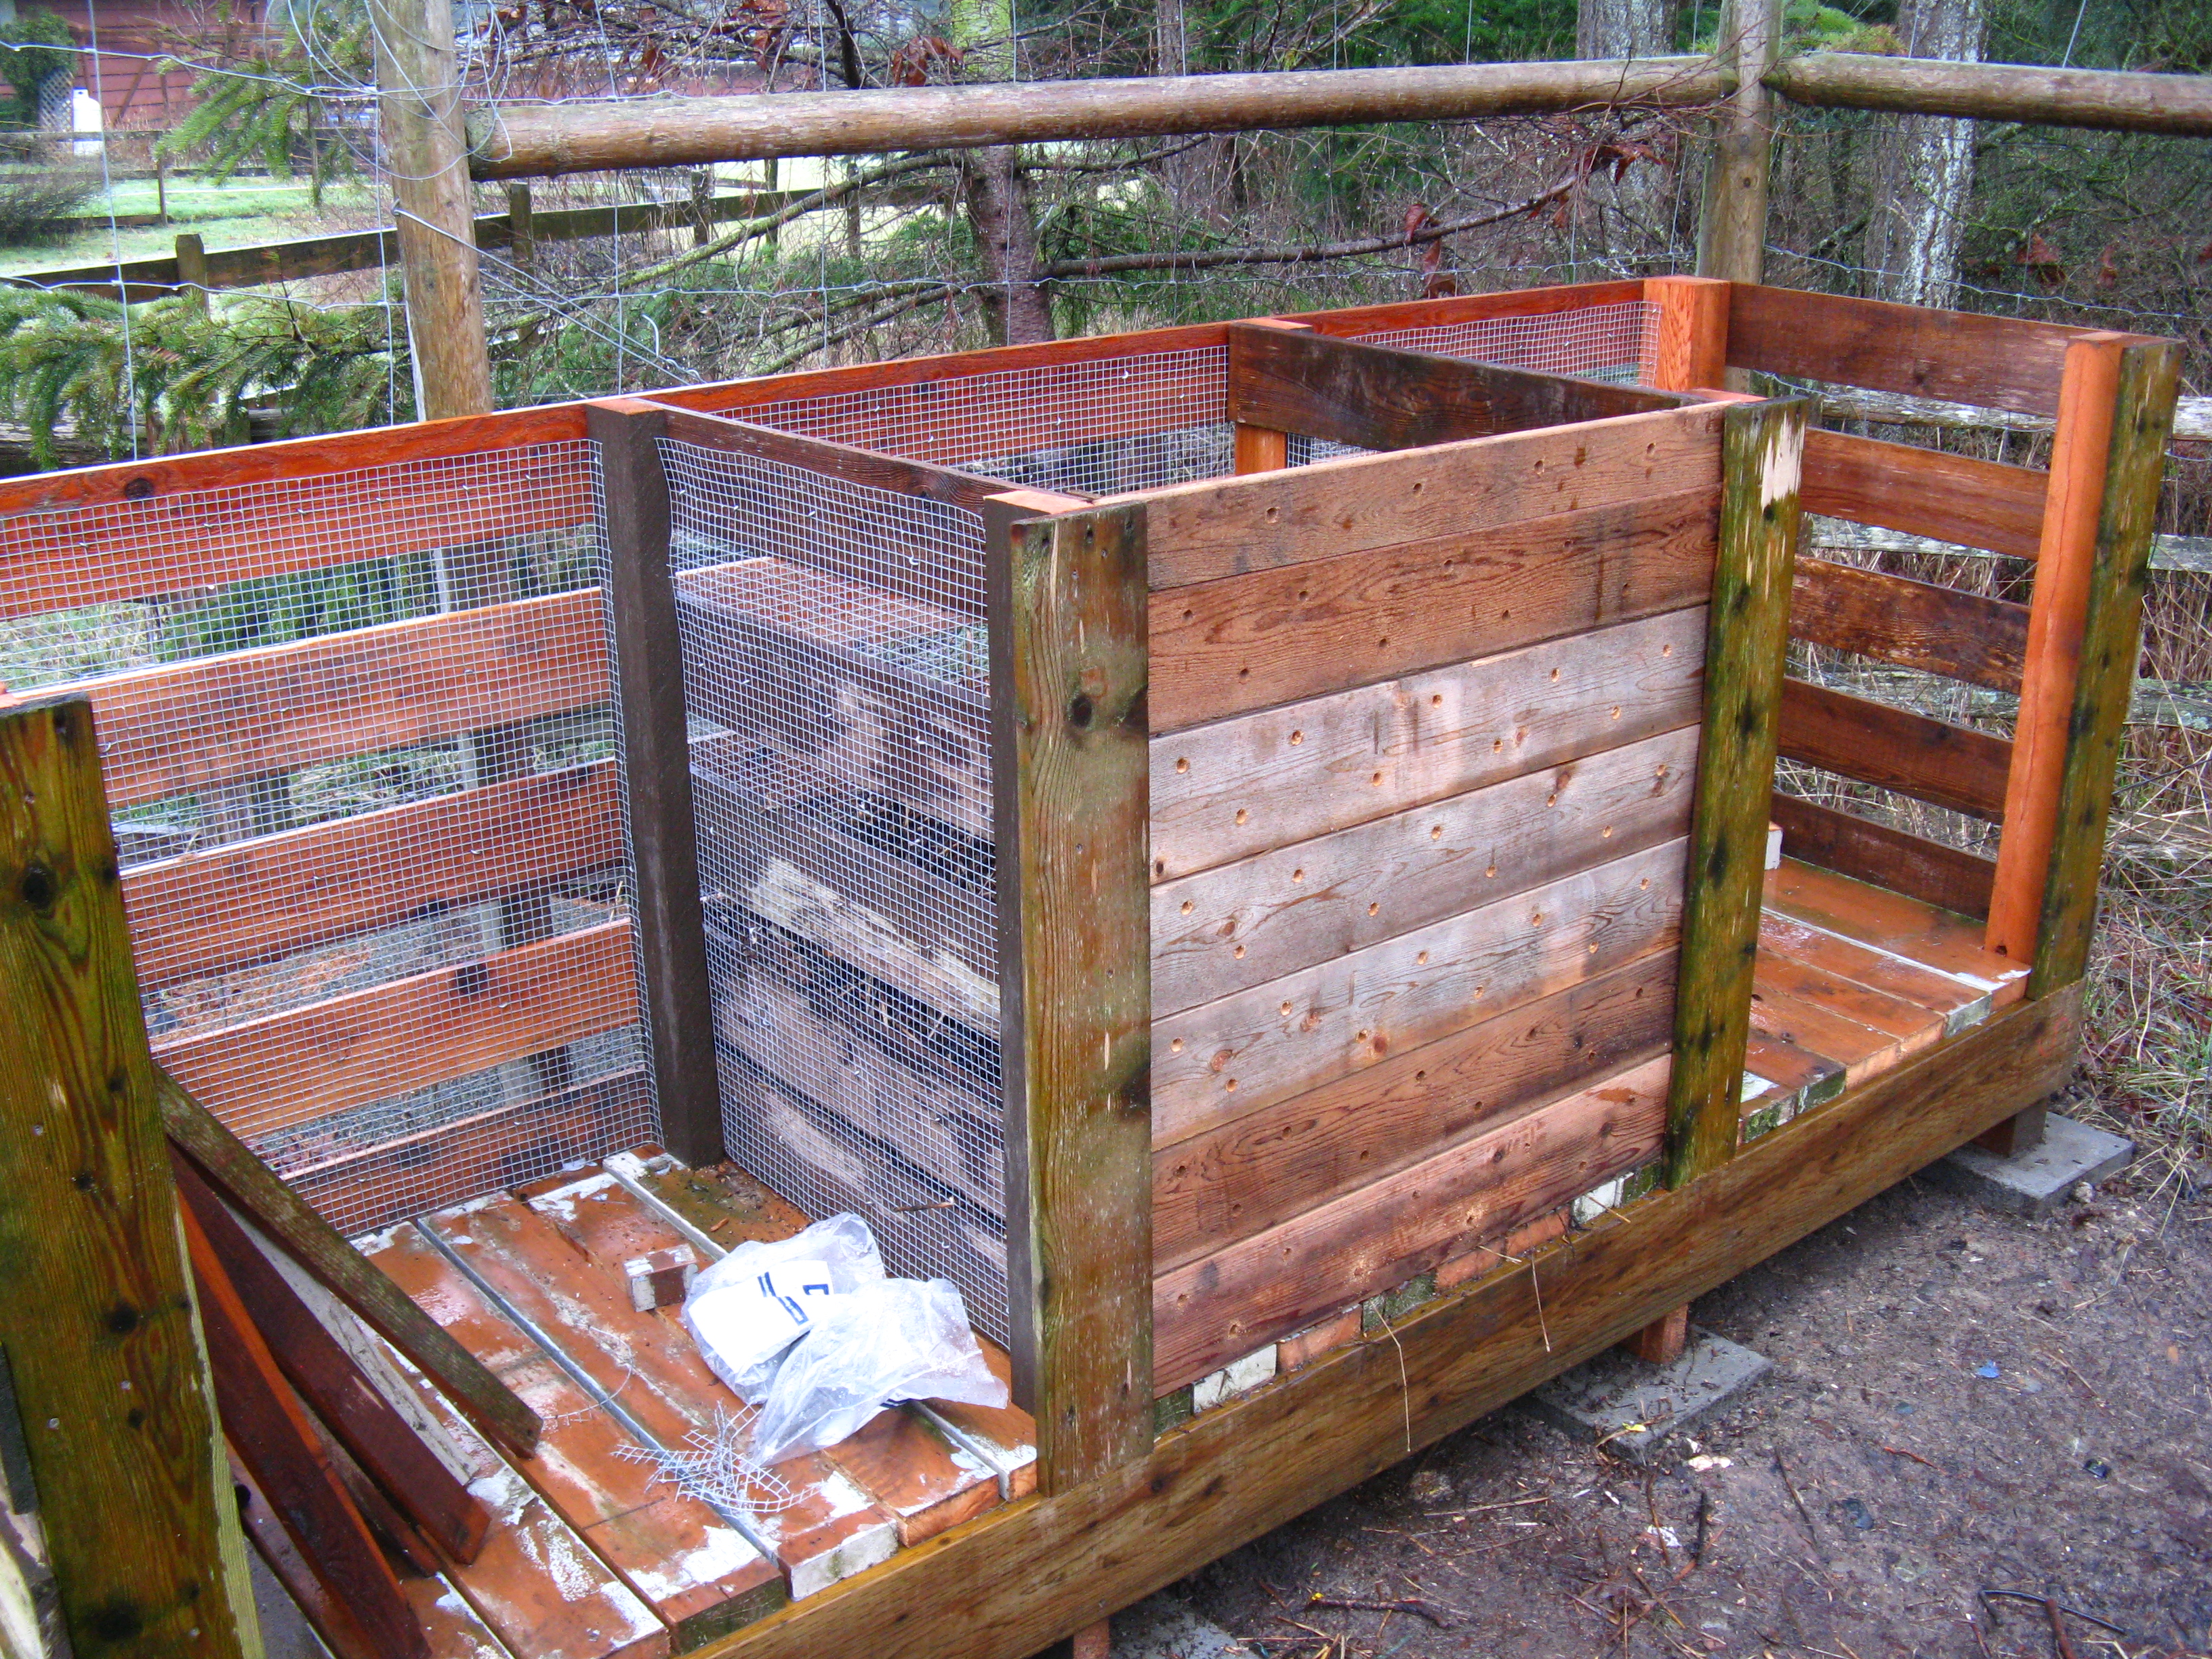 how to build a compost bin from pallets - diy compost bin